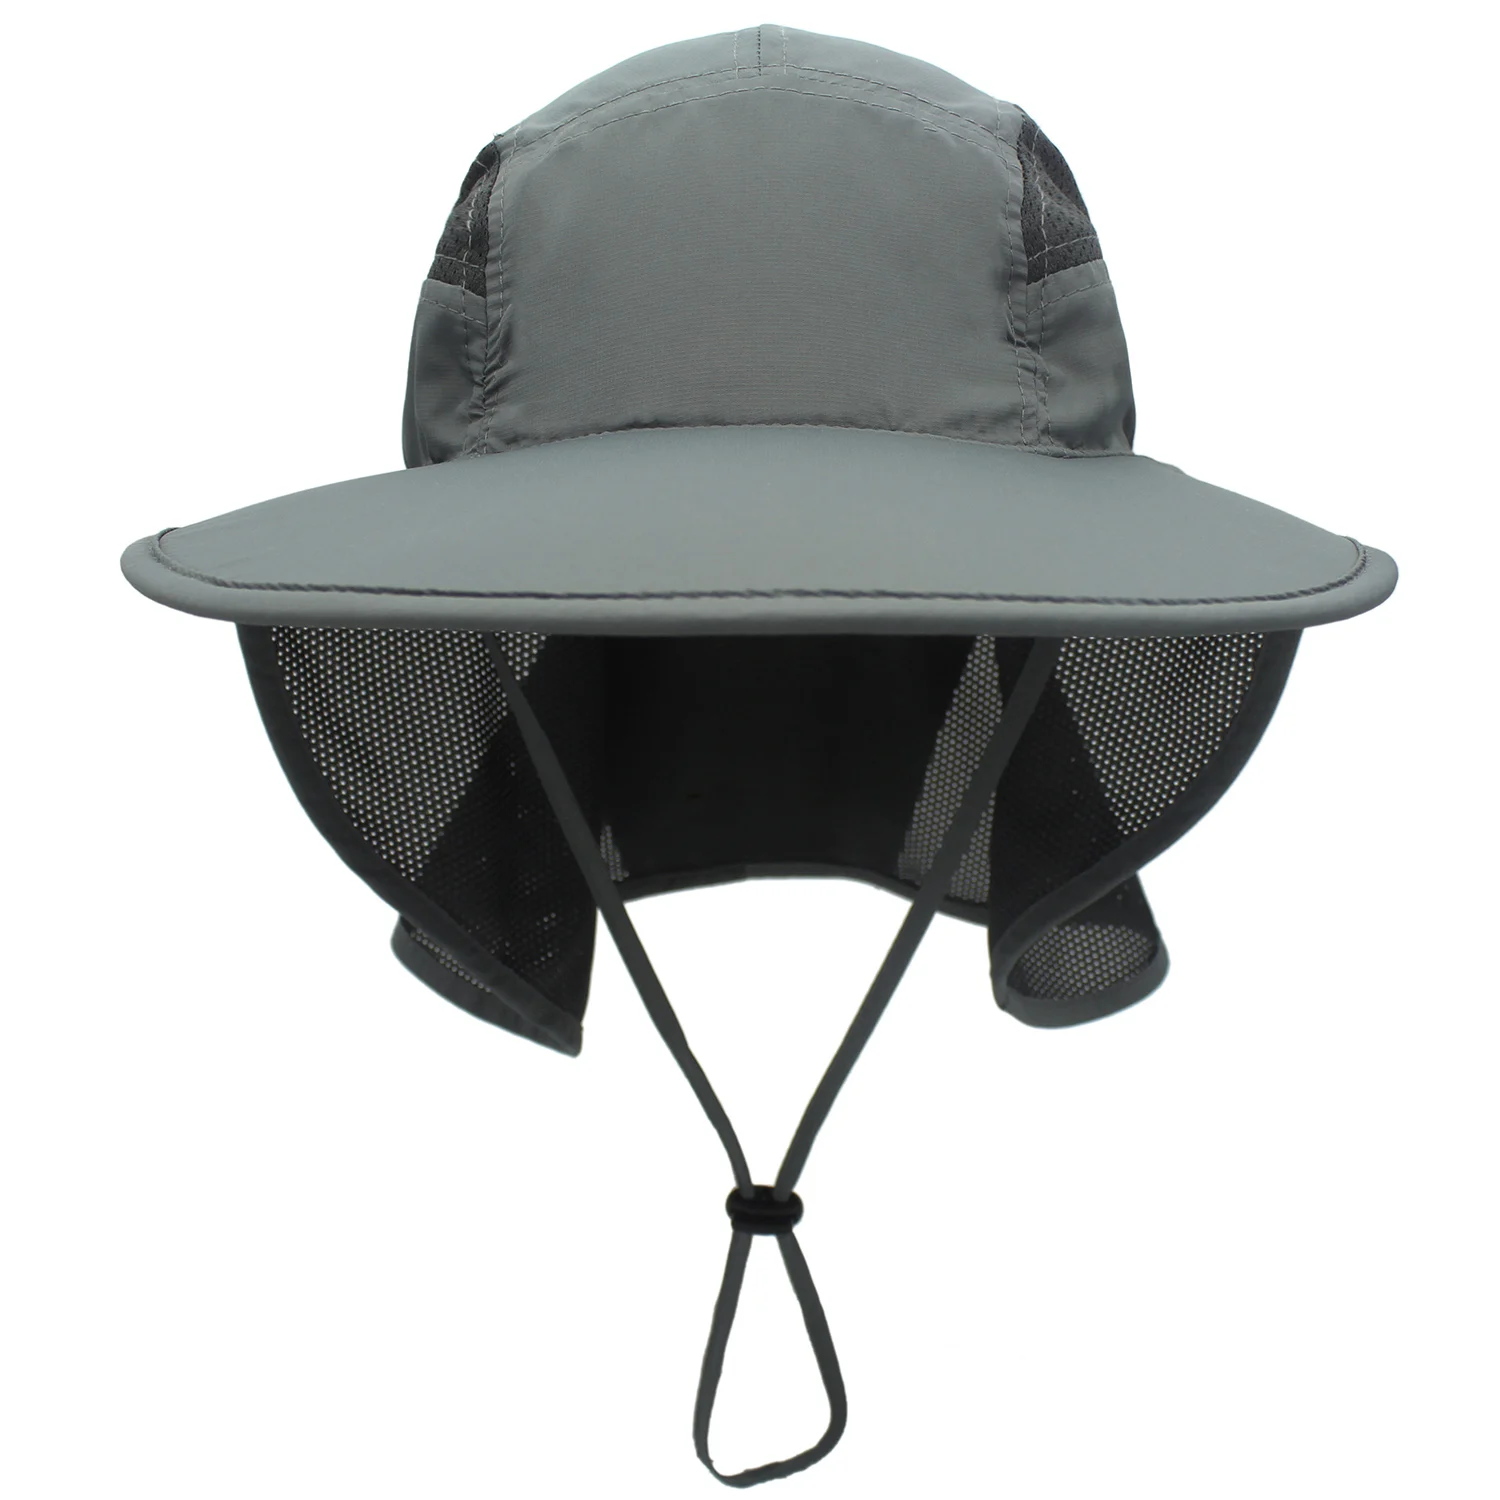 Outfly Summer Sun Hat Men Women Multi-Functional UV Wide-Brimmed Fisherman Hat Women Neck Protection Riding Hunting Hat 1